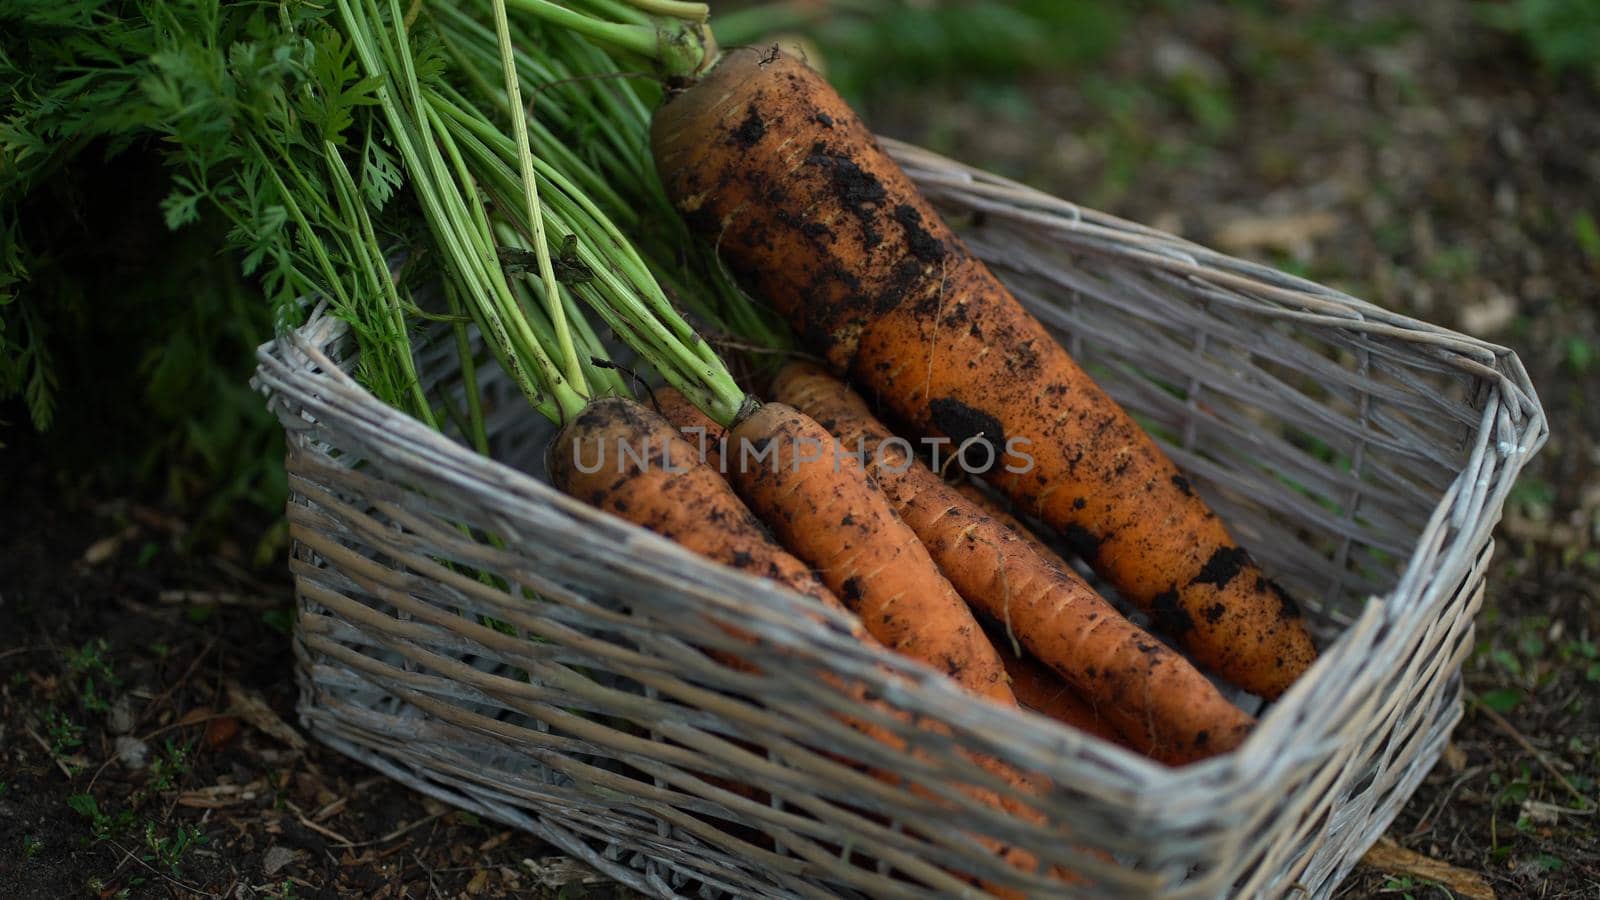 The farmer puts carrots in a straw basket that stands on the ground by Petrokill